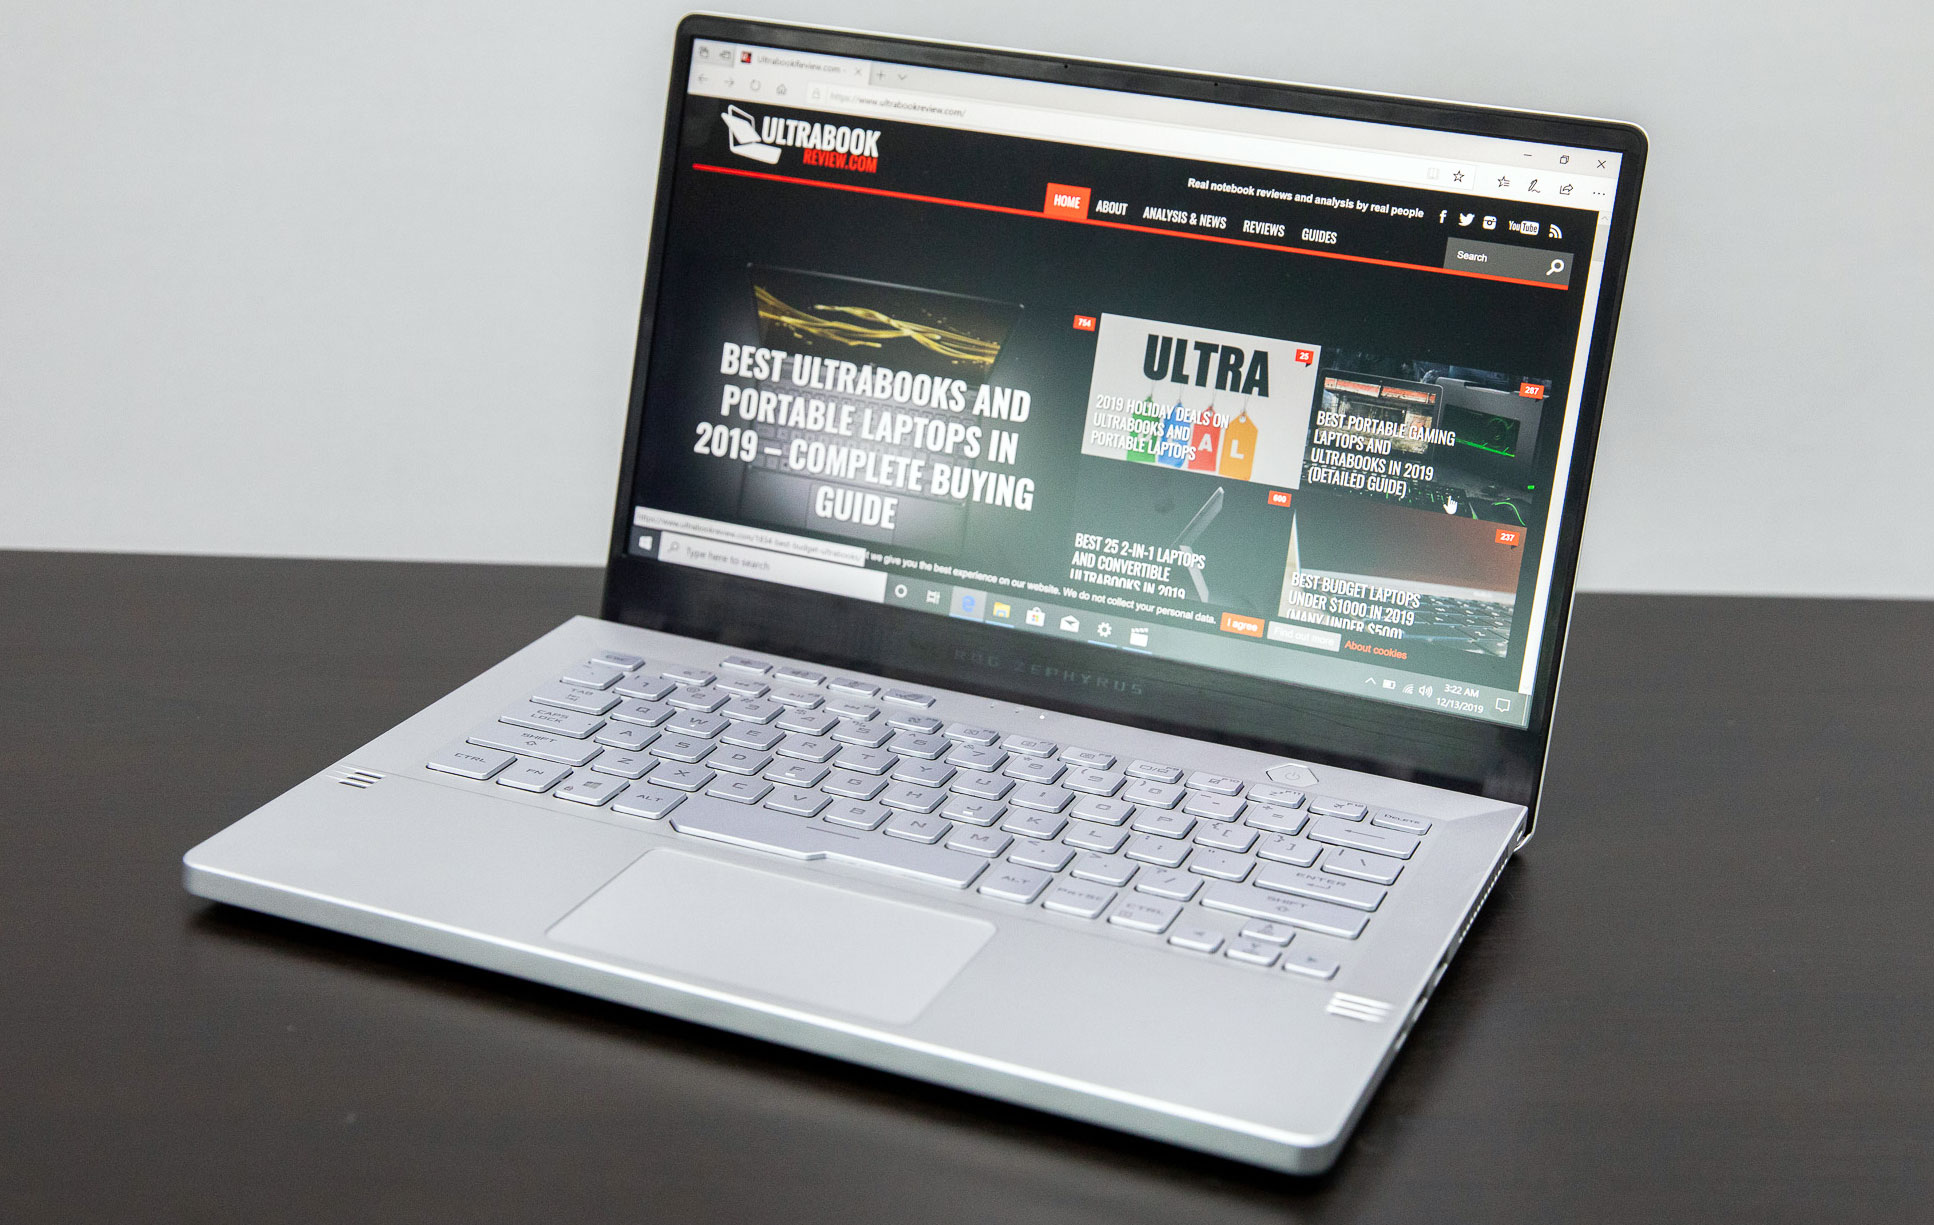 14-inch Asus Zephyrus G14 with AMD Ryzen 4000 and RTX 2060 graphics